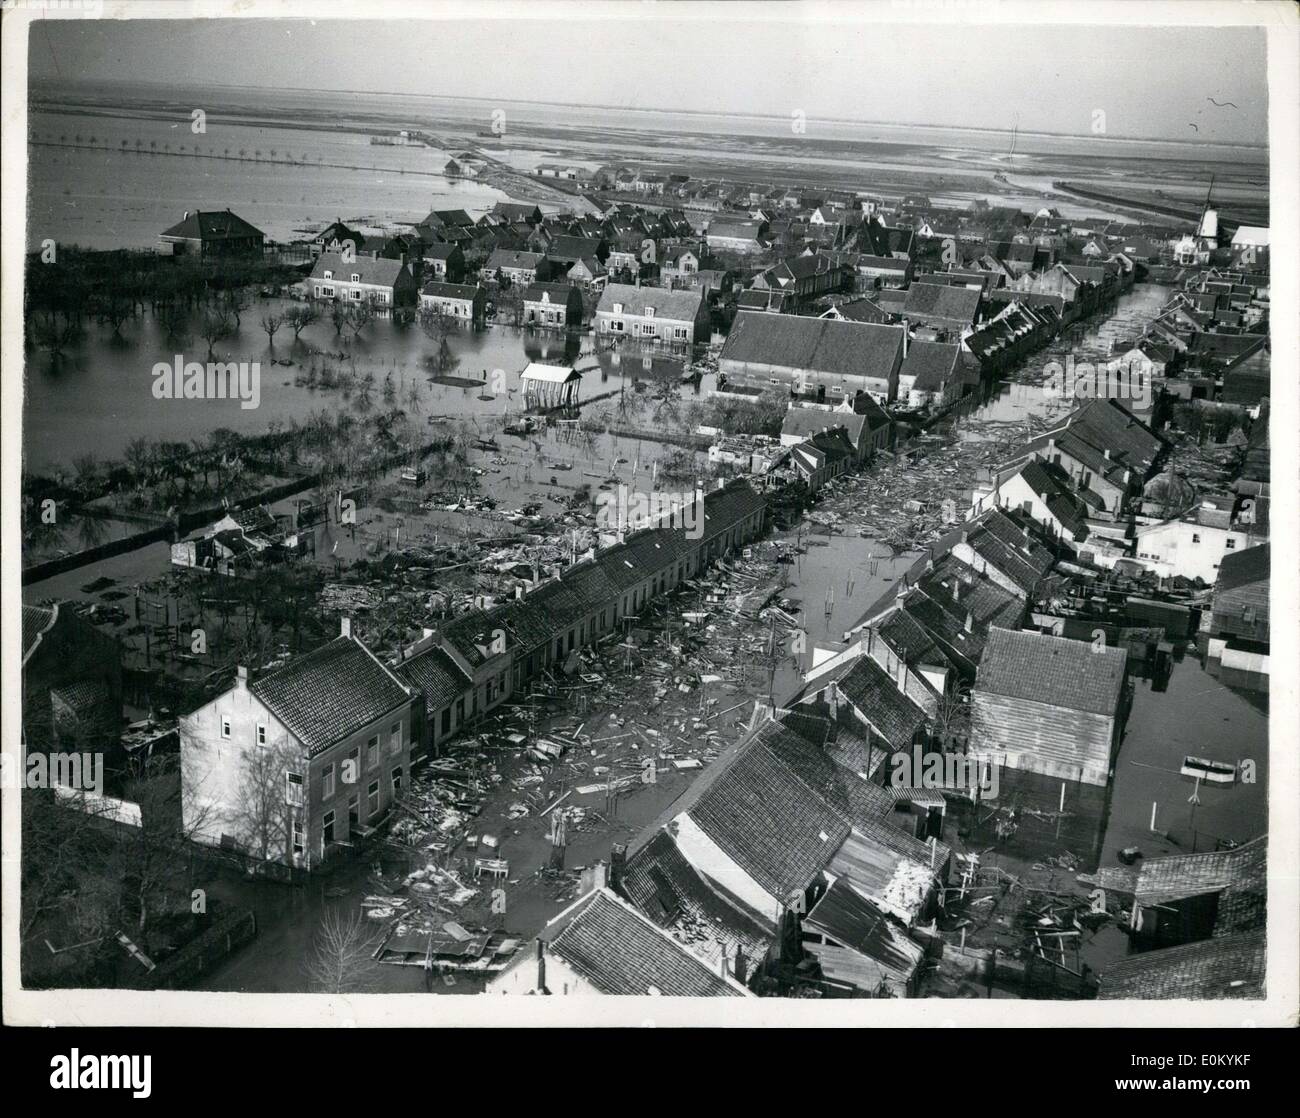 Feb. 02, 1953 - Latest pictures of the Flood Devastation in Holland : Photo shows The scene of devastation in the village of stellendam which is a ghost village completely evacuated. It is on the island of George overlakkee. Stock Photo